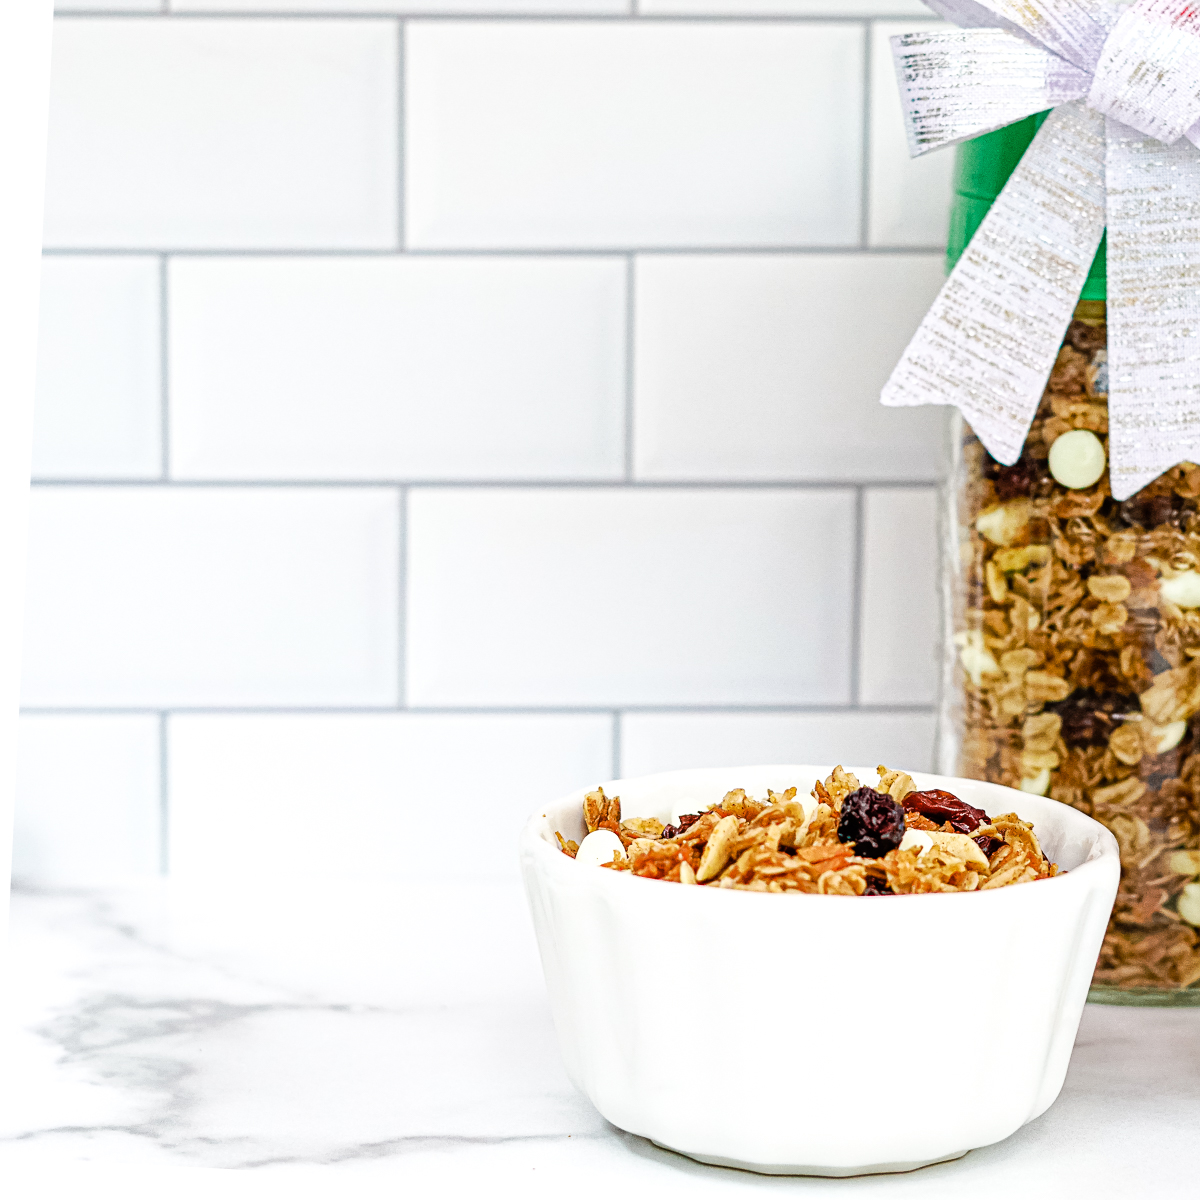 Gingerbread granola in a white bowl on a white countertop. Dried cranberries, oats and white chocolate chips. Jar of granola in the background with a green lid and silver ribbon to be given as a gift.